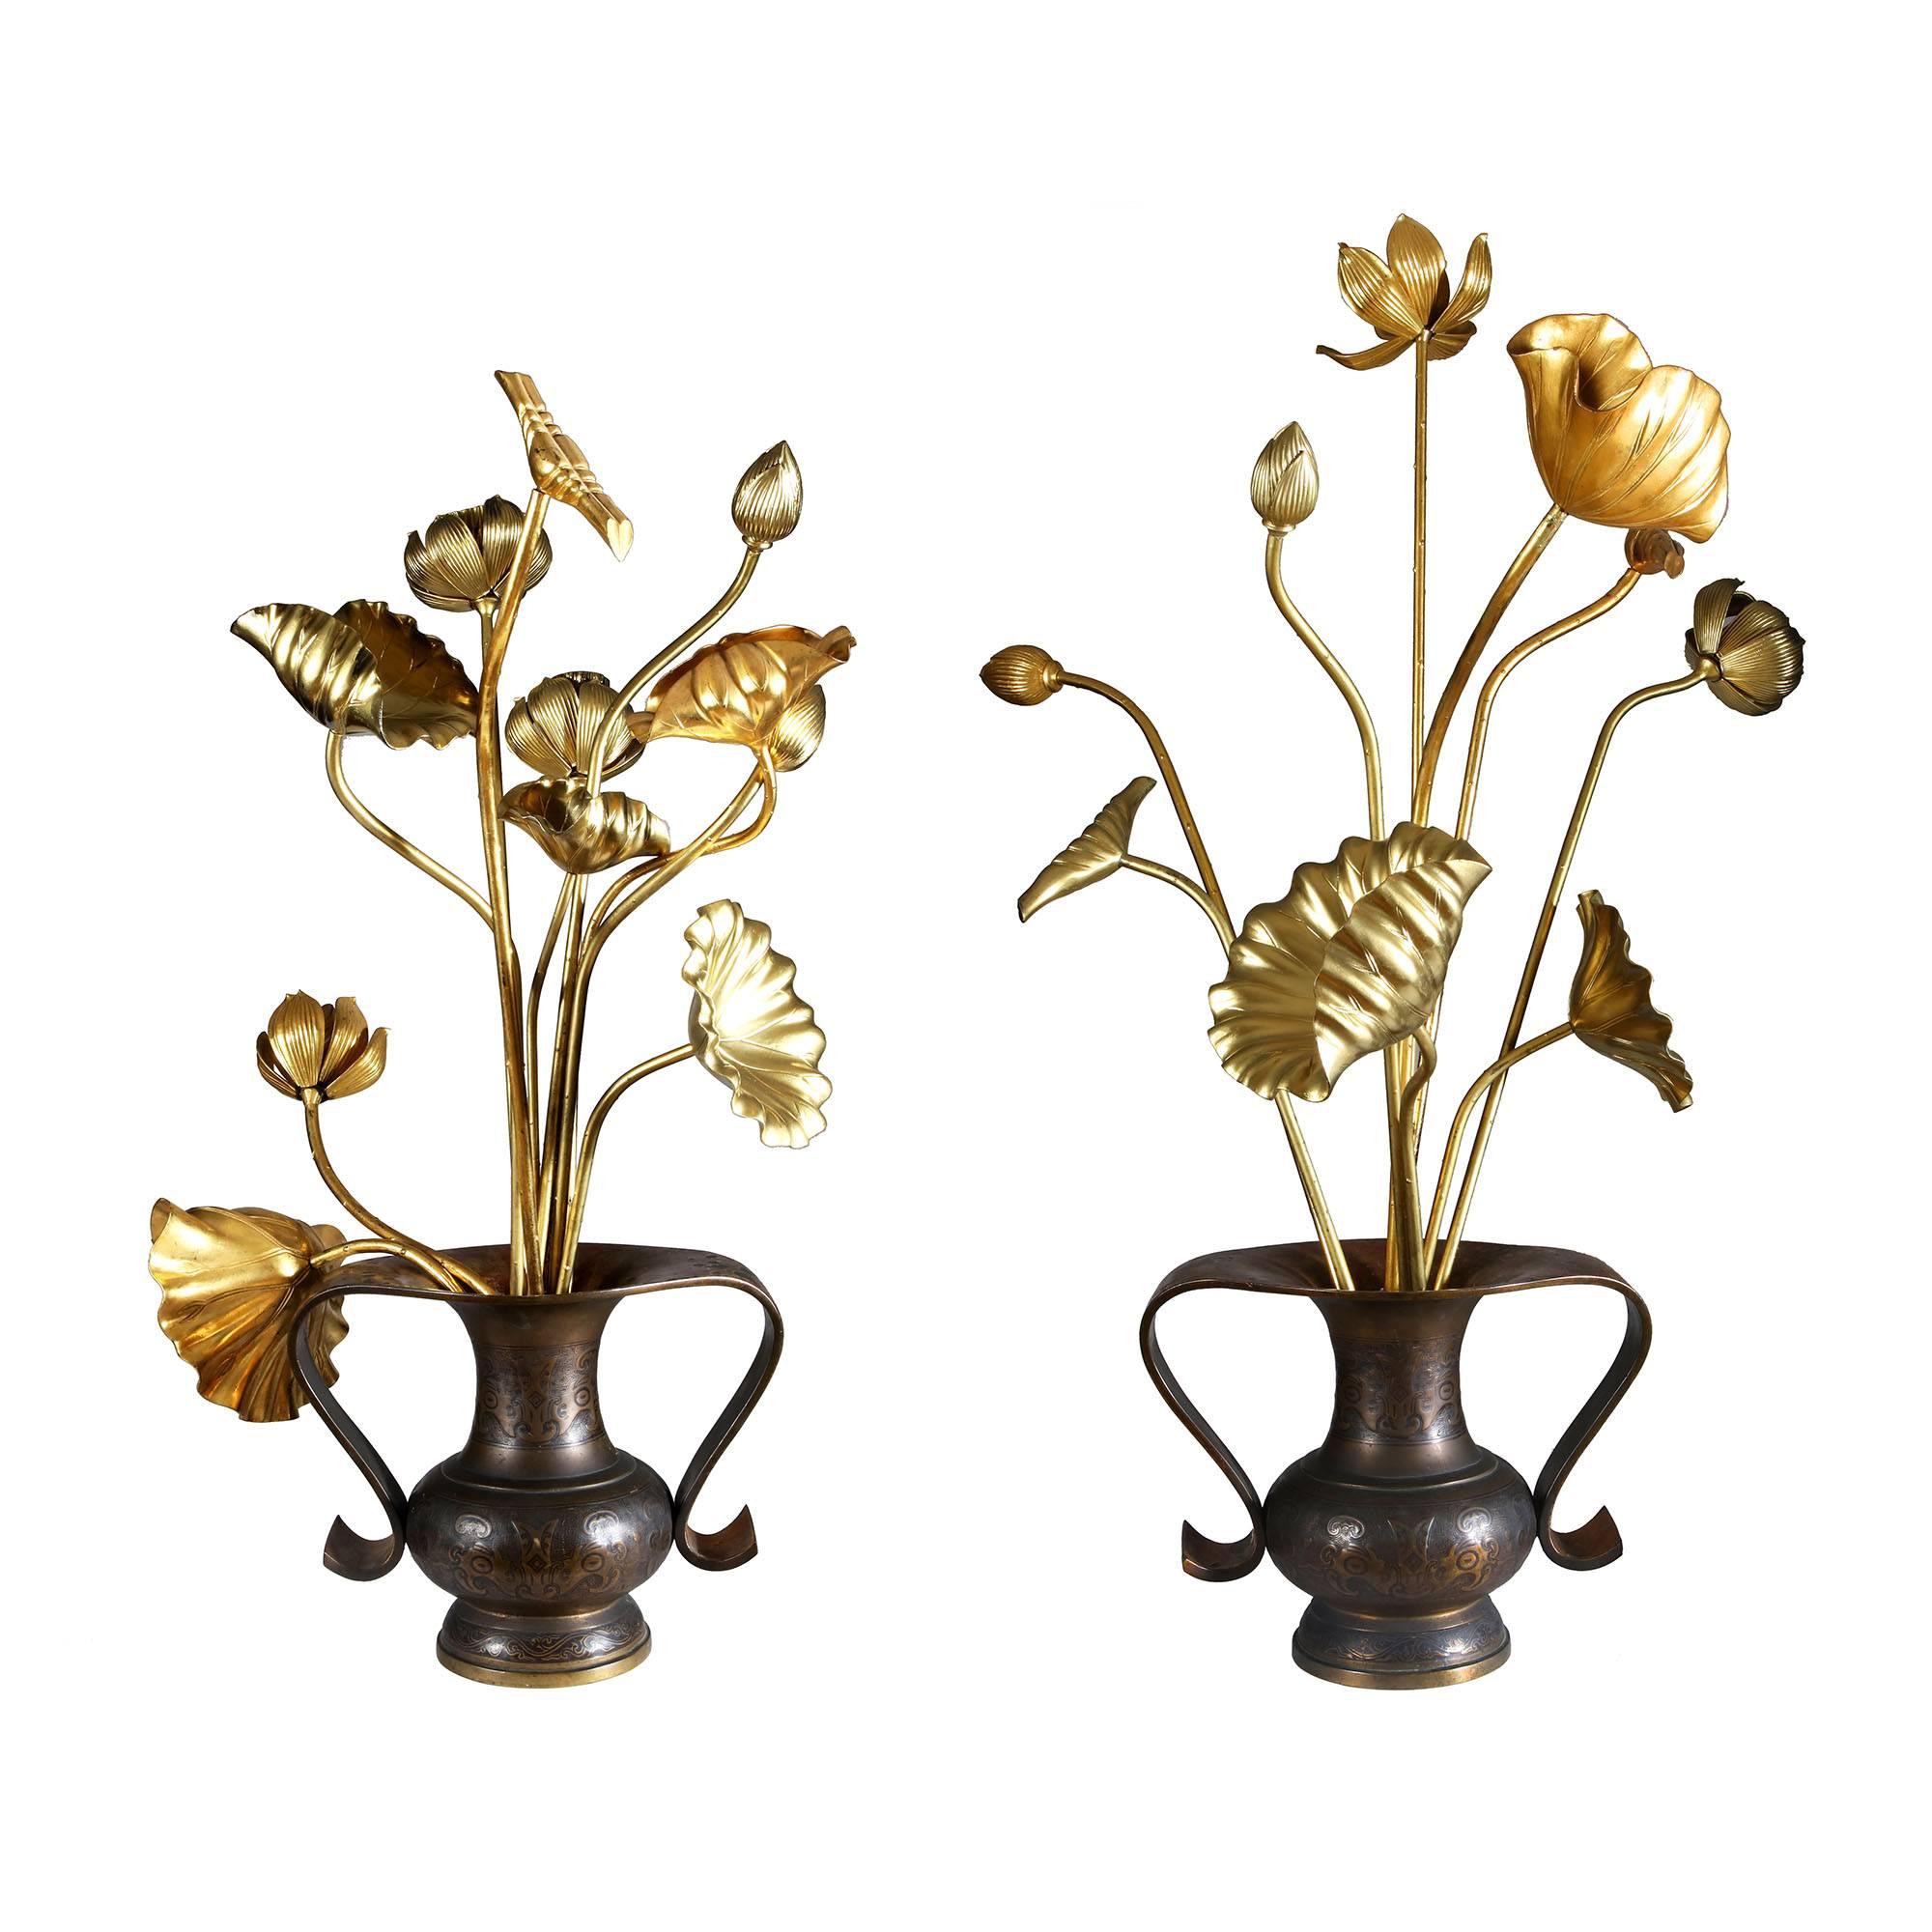 Collection of 20 Japanese Gold Lacquered Lotus Flowers